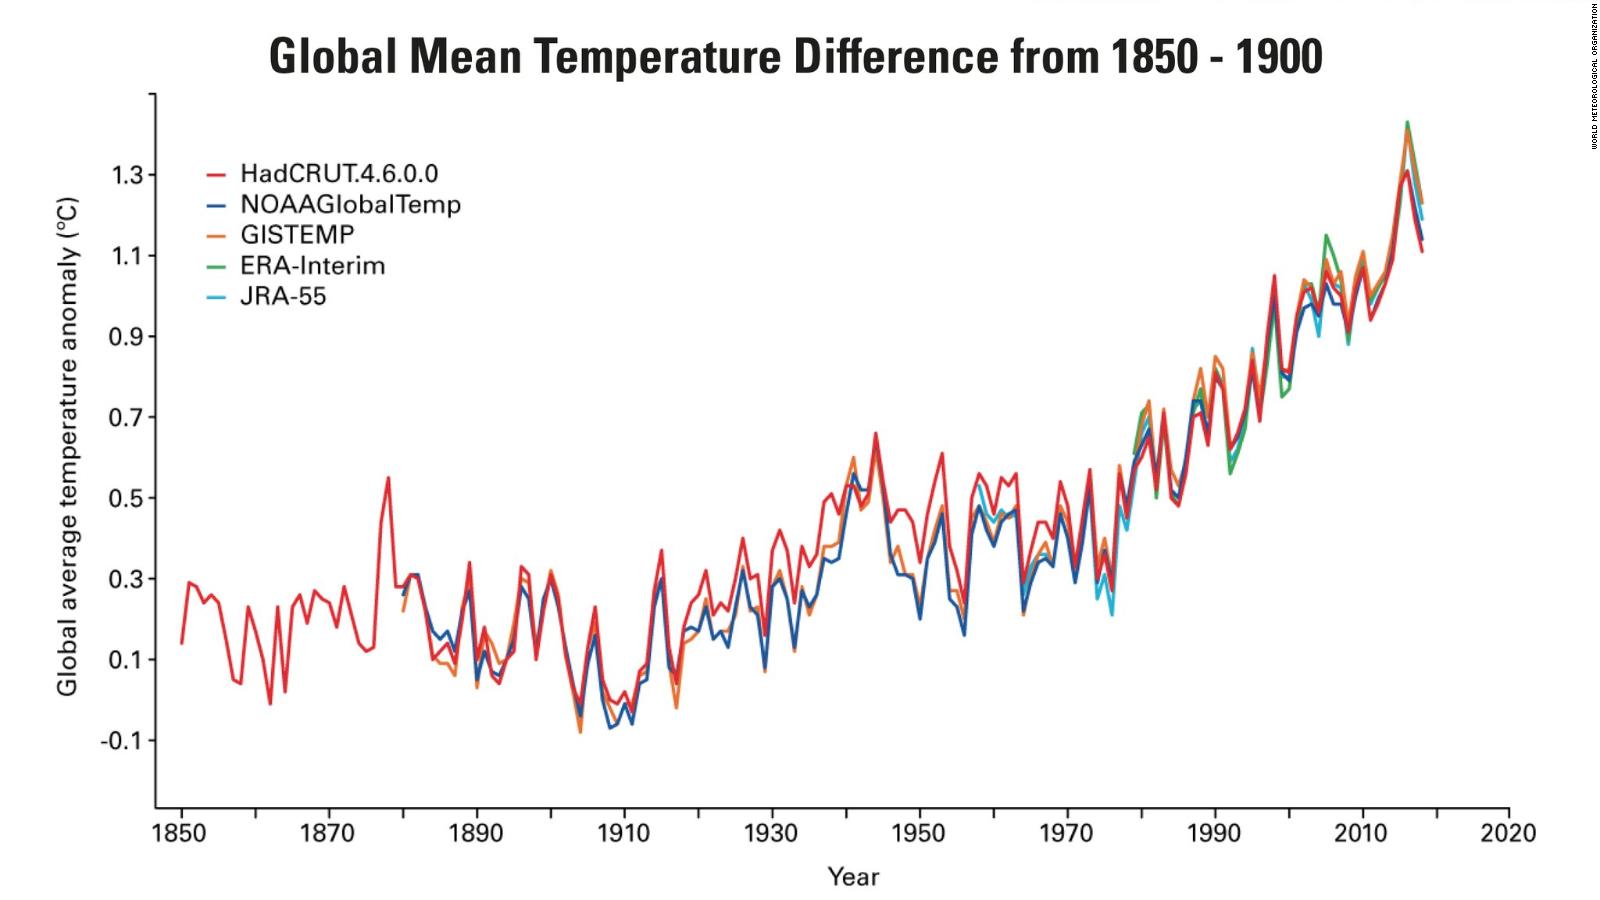 The past four years have been the hottest on record, and we are seeing